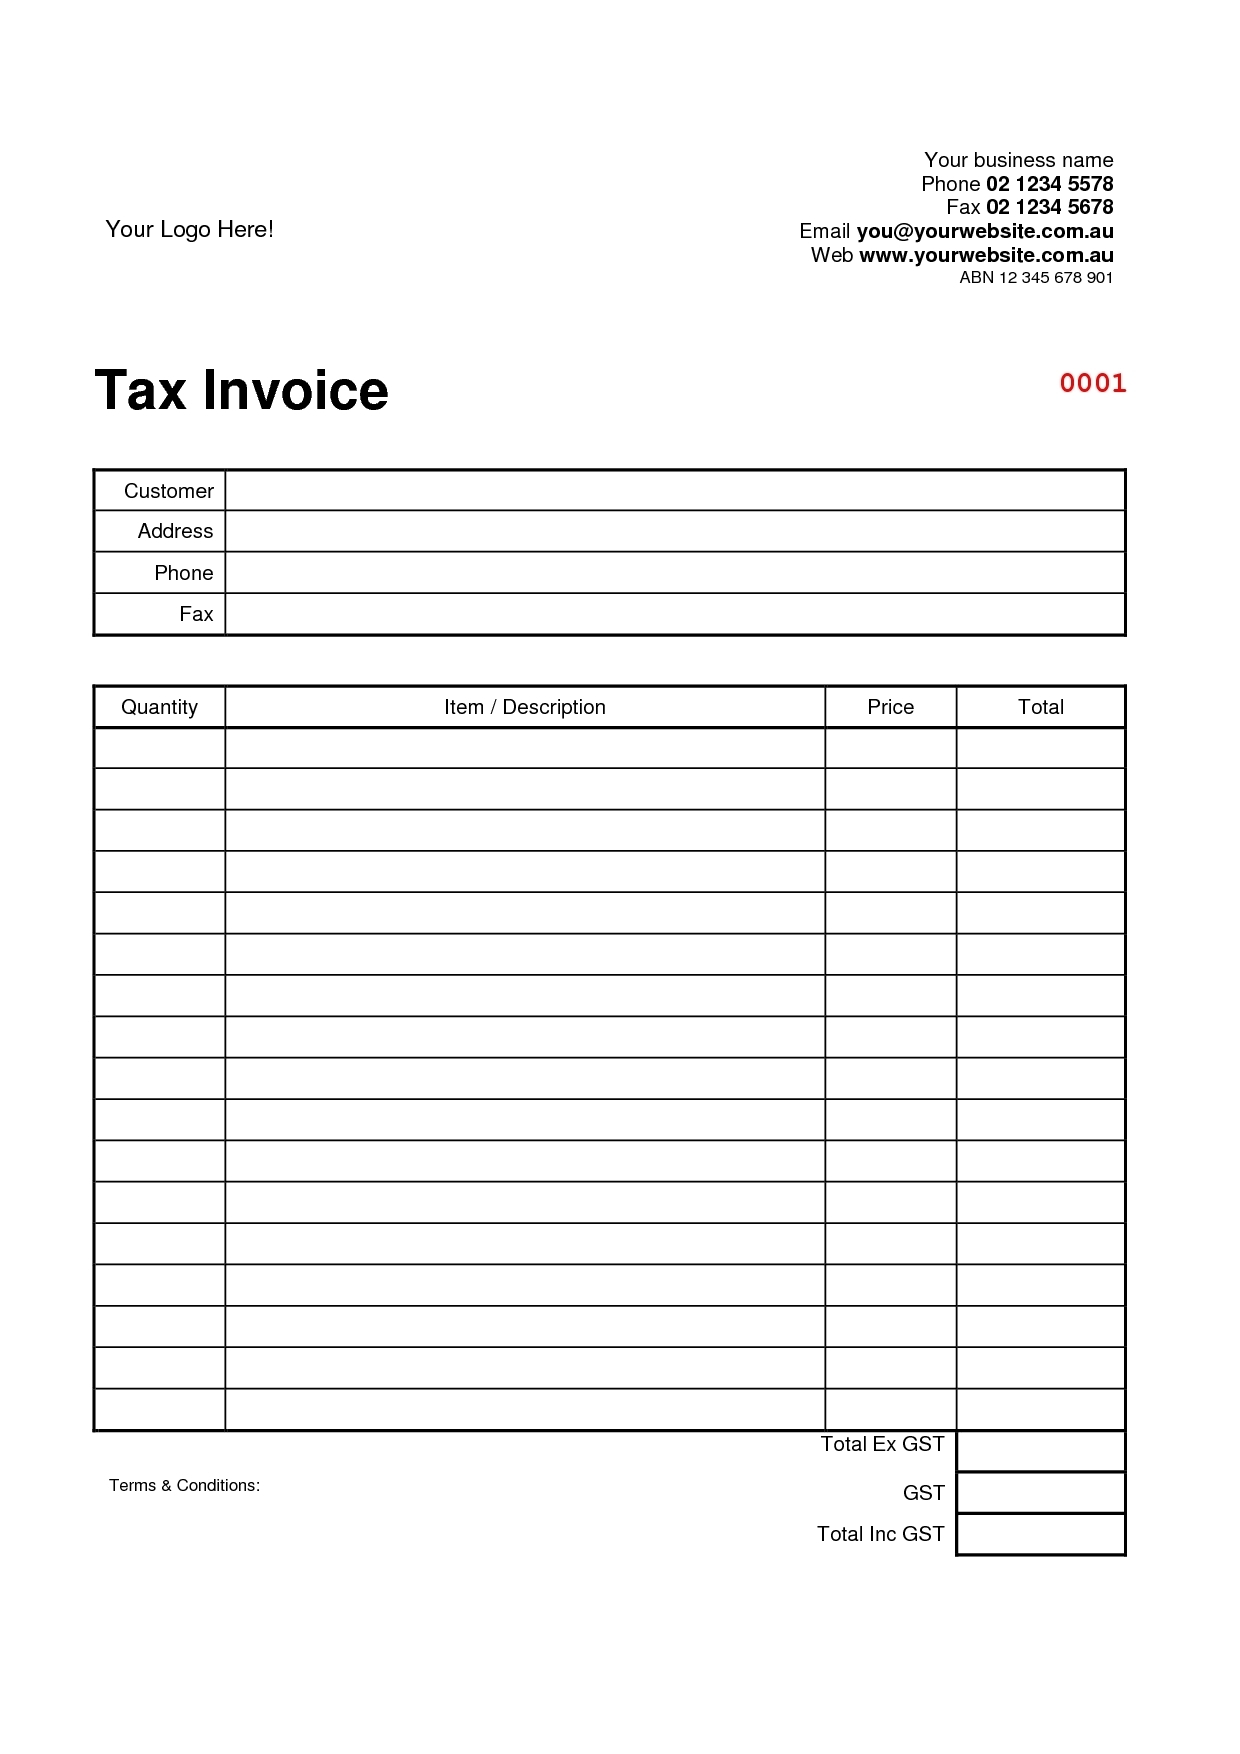 tax invoices basic bill of sale template sample invitation cards recipient created tax invoice agreement